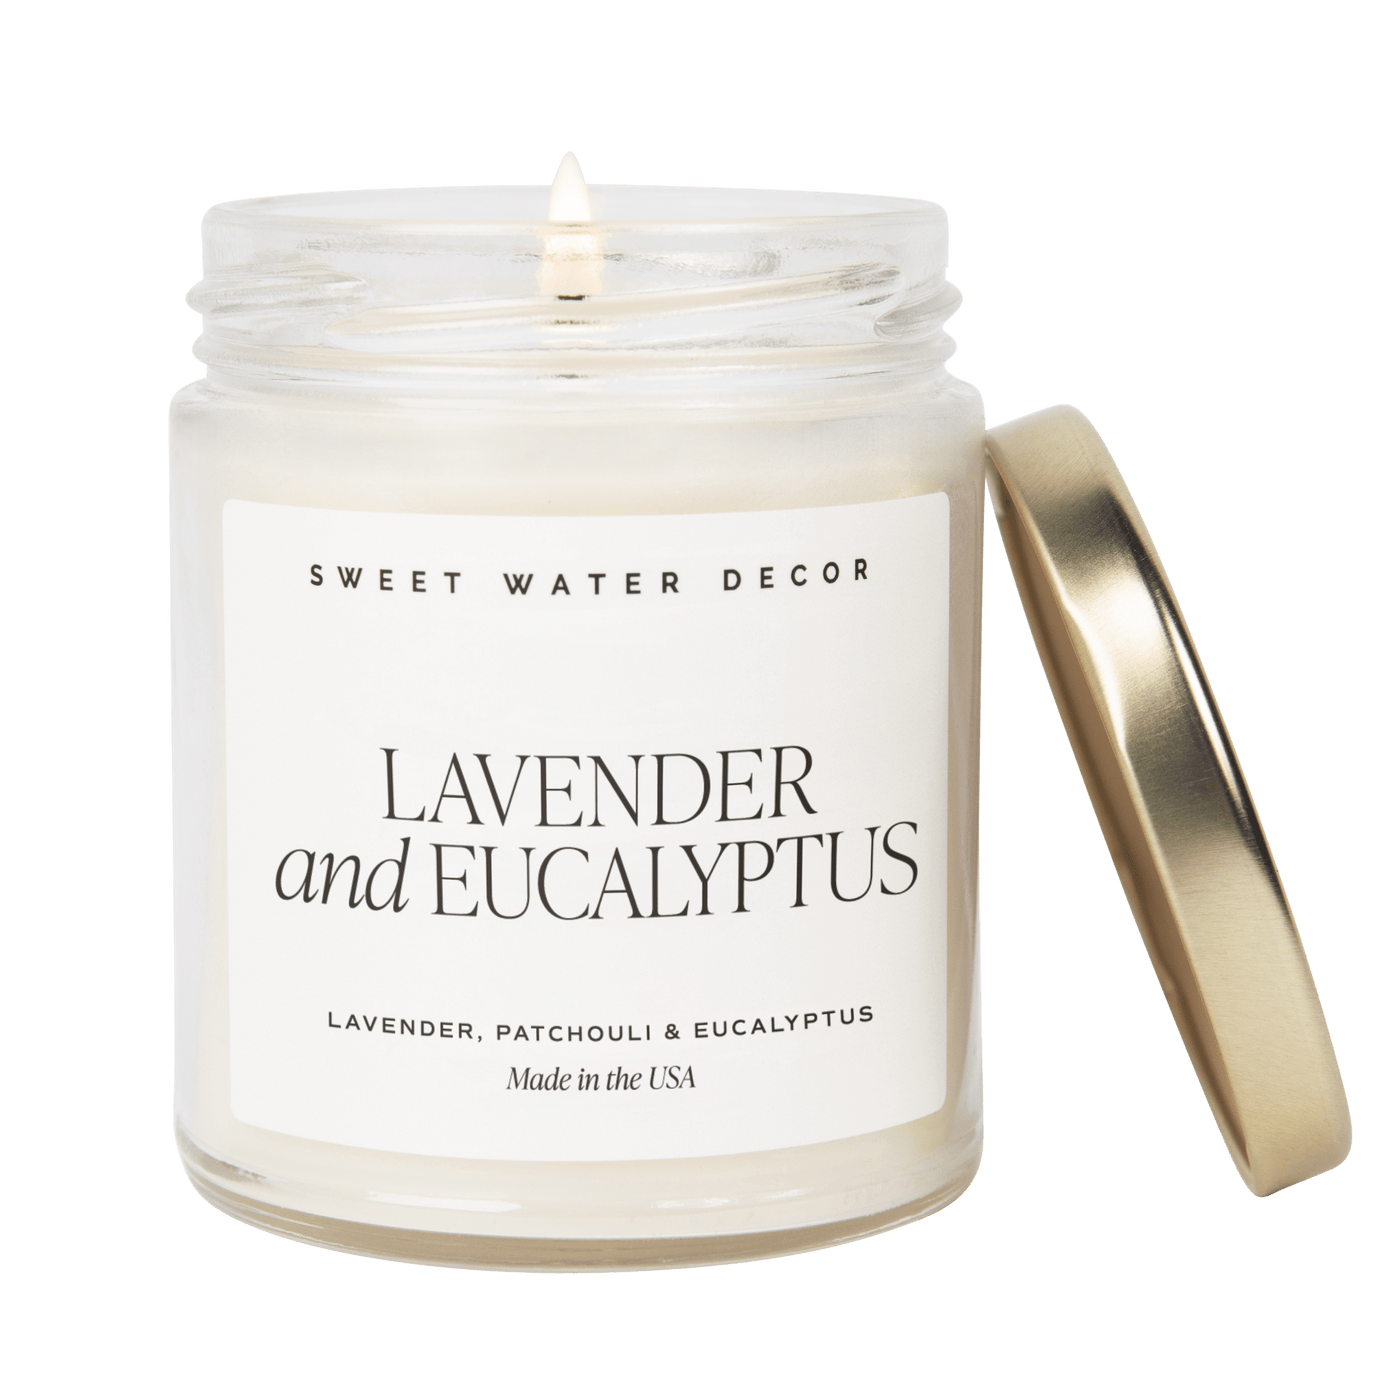 Lavender and Eucalyptus Soy Candle - Clear Jar - 9 oz - Sweet Water Decor - Candles